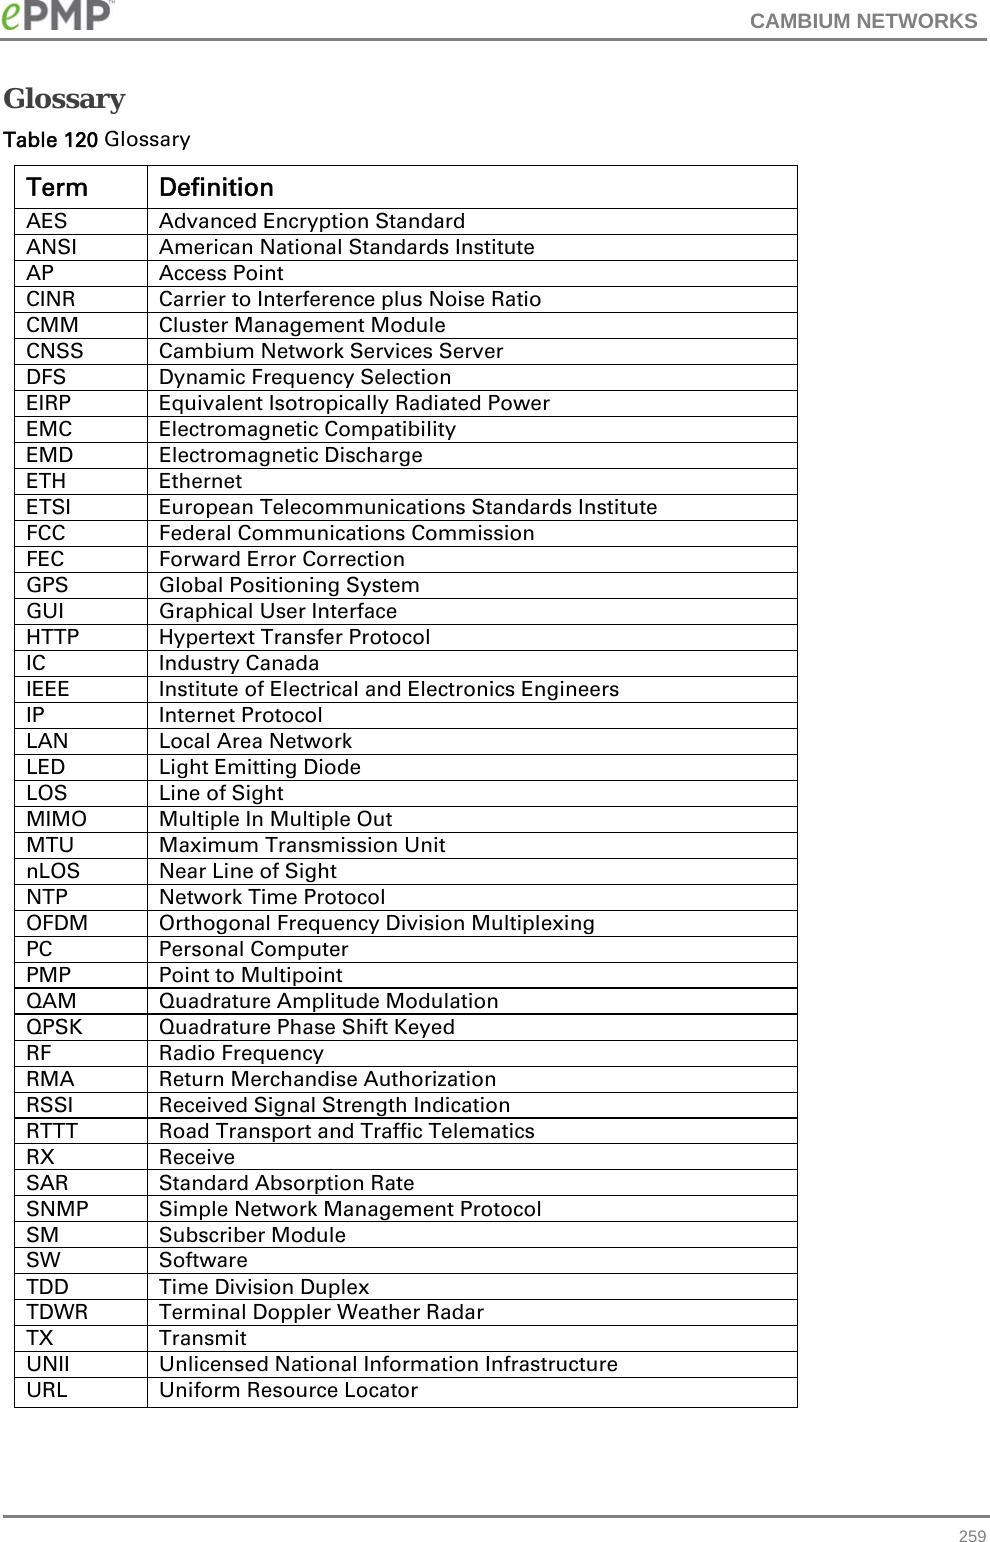 CAMBIUM NETWORKS   259Glossary Table 120 Glossary Term Definition AES  Advanced Encryption Standard ANSI  American National Standards Institute AP Access Point CINR  Carrier to Interference plus Noise Ratio CMM Cluster Management Module CNSS  Cambium Network Services Server DFS  Dynamic Frequency Selection EIRP  Equivalent Isotropically Radiated Power EMC Electromagnetic Compatibility EMD Electromagnetic Discharge ETH Ethernet ETSI  European Telecommunications Standards Institute FCC Federal Communications Commission FEC  Forward Error Correction GPS  Global Positioning System GUI  Graphical User Interface HTTP  Hypertext Transfer Protocol IC Industry Canada IEEE  Institute of Electrical and Electronics Engineers IP Internet Protocol LAN  Local Area Network LED  Light Emitting Diode LOS Line of Sight MIMO  Multiple In Multiple Out MTU Maximum Transmission Unit nLOS  Near Line of Sight NTP  Network Time Protocol OFDM  Orthogonal Frequency Division Multiplexing PC Personal Computer PMP  Point to Multipoint QAM Quadrature Amplitude Modulation QPSK  Quadrature Phase Shift Keyed RF Radio Frequency RMA Return Merchandise Authorization RSSI  Received Signal Strength Indication RTTT  Road Transport and Traffic Telematics RX Receive SAR  Standard Absorption Rate SNMP  Simple Network Management Protocol SM Subscriber Module SW Software TDD  Time Division Duplex TDWR  Terminal Doppler Weather Radar TX Transmit UNII Unlicensed National Information Infrastructure URL  Uniform Resource Locator  